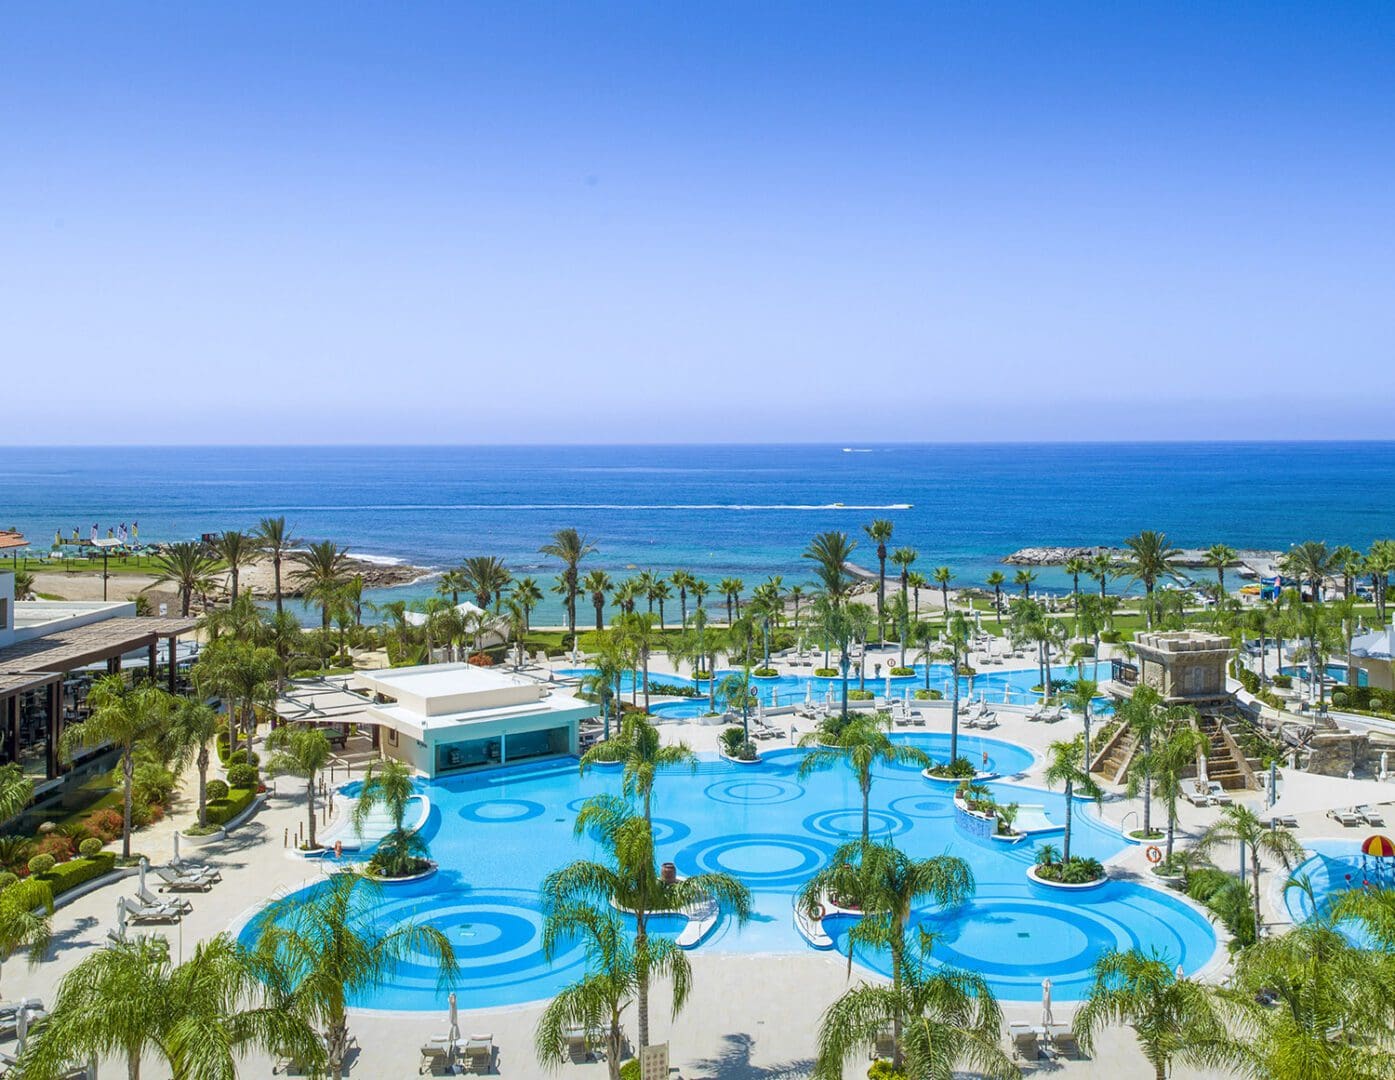 The pristine pool, surrounded by palm trees, with the beach in the distance at Olympic Lagoon Resorts, Paphos.